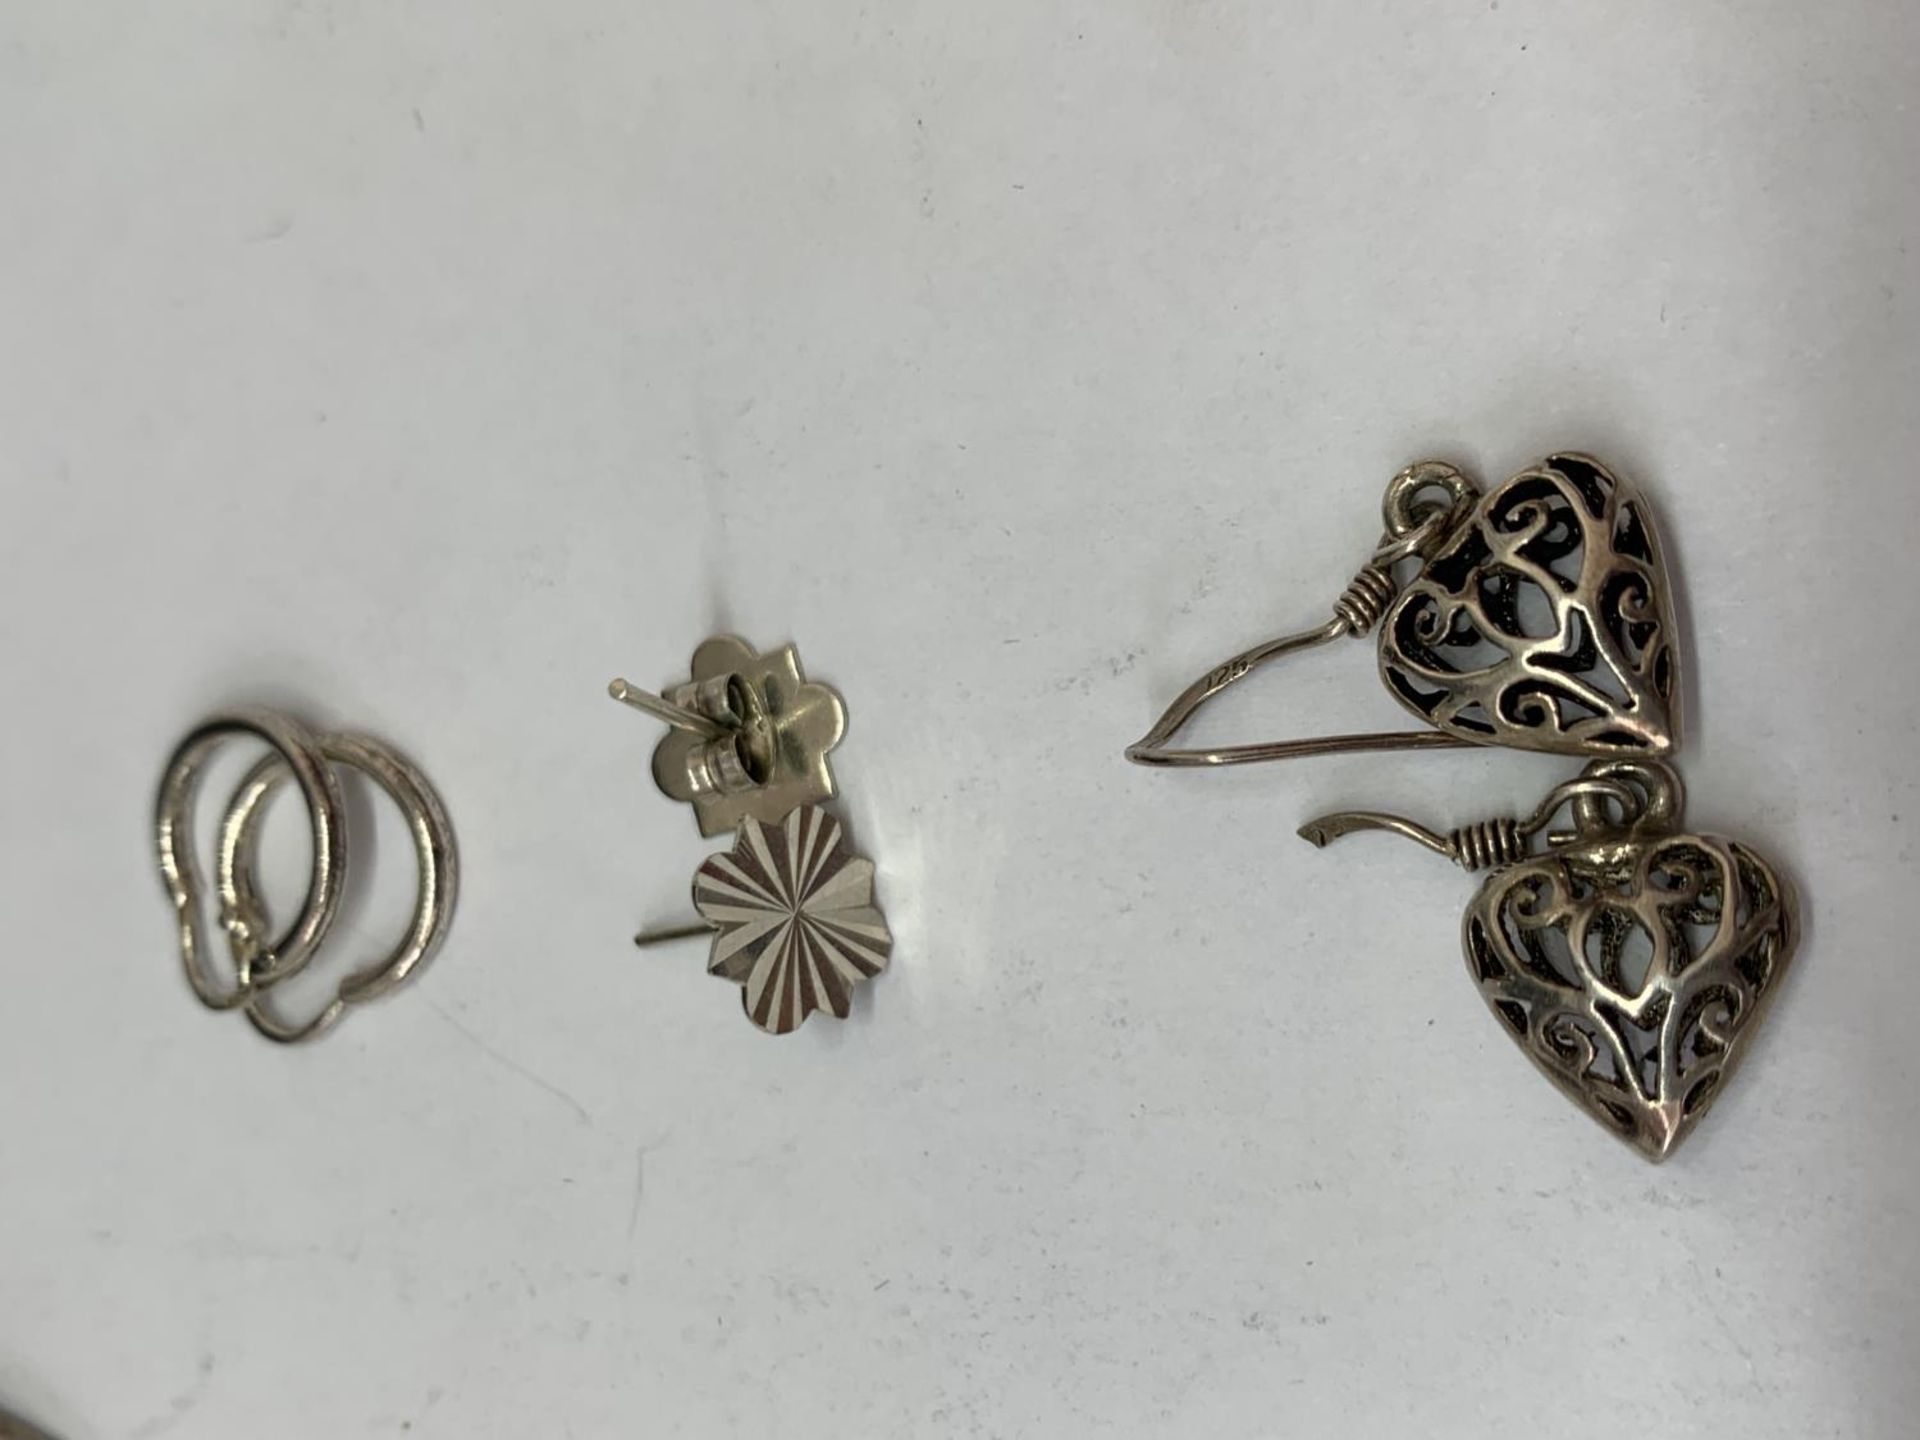 SEVEN PAIRS OF SILVER EARRINGS - Image 3 of 3